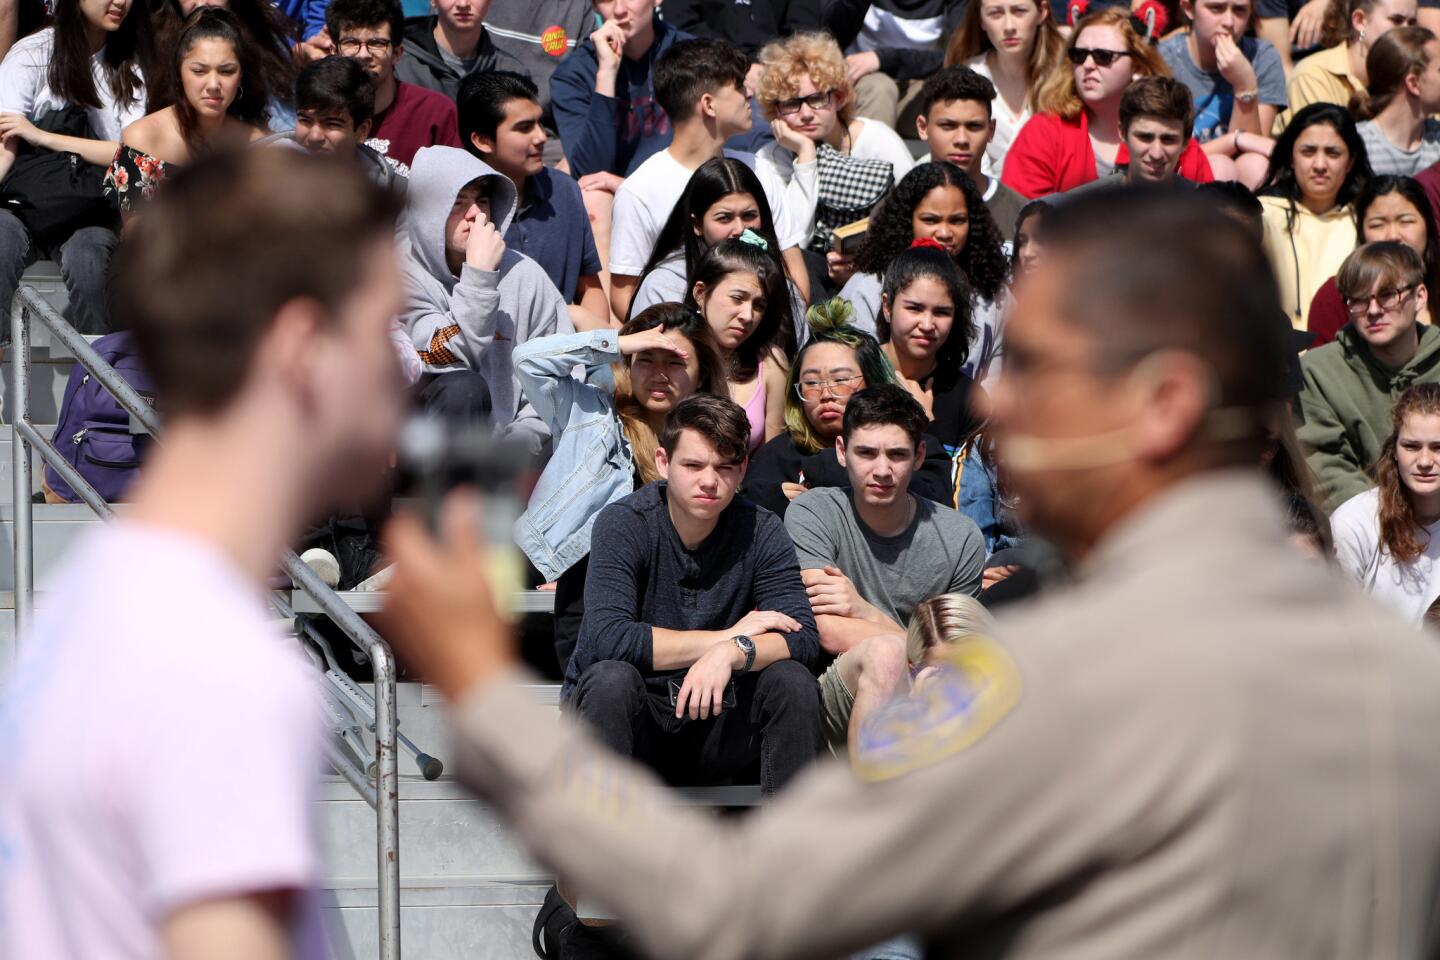 Photo Gallery: Every 15 minutes at La Canada High